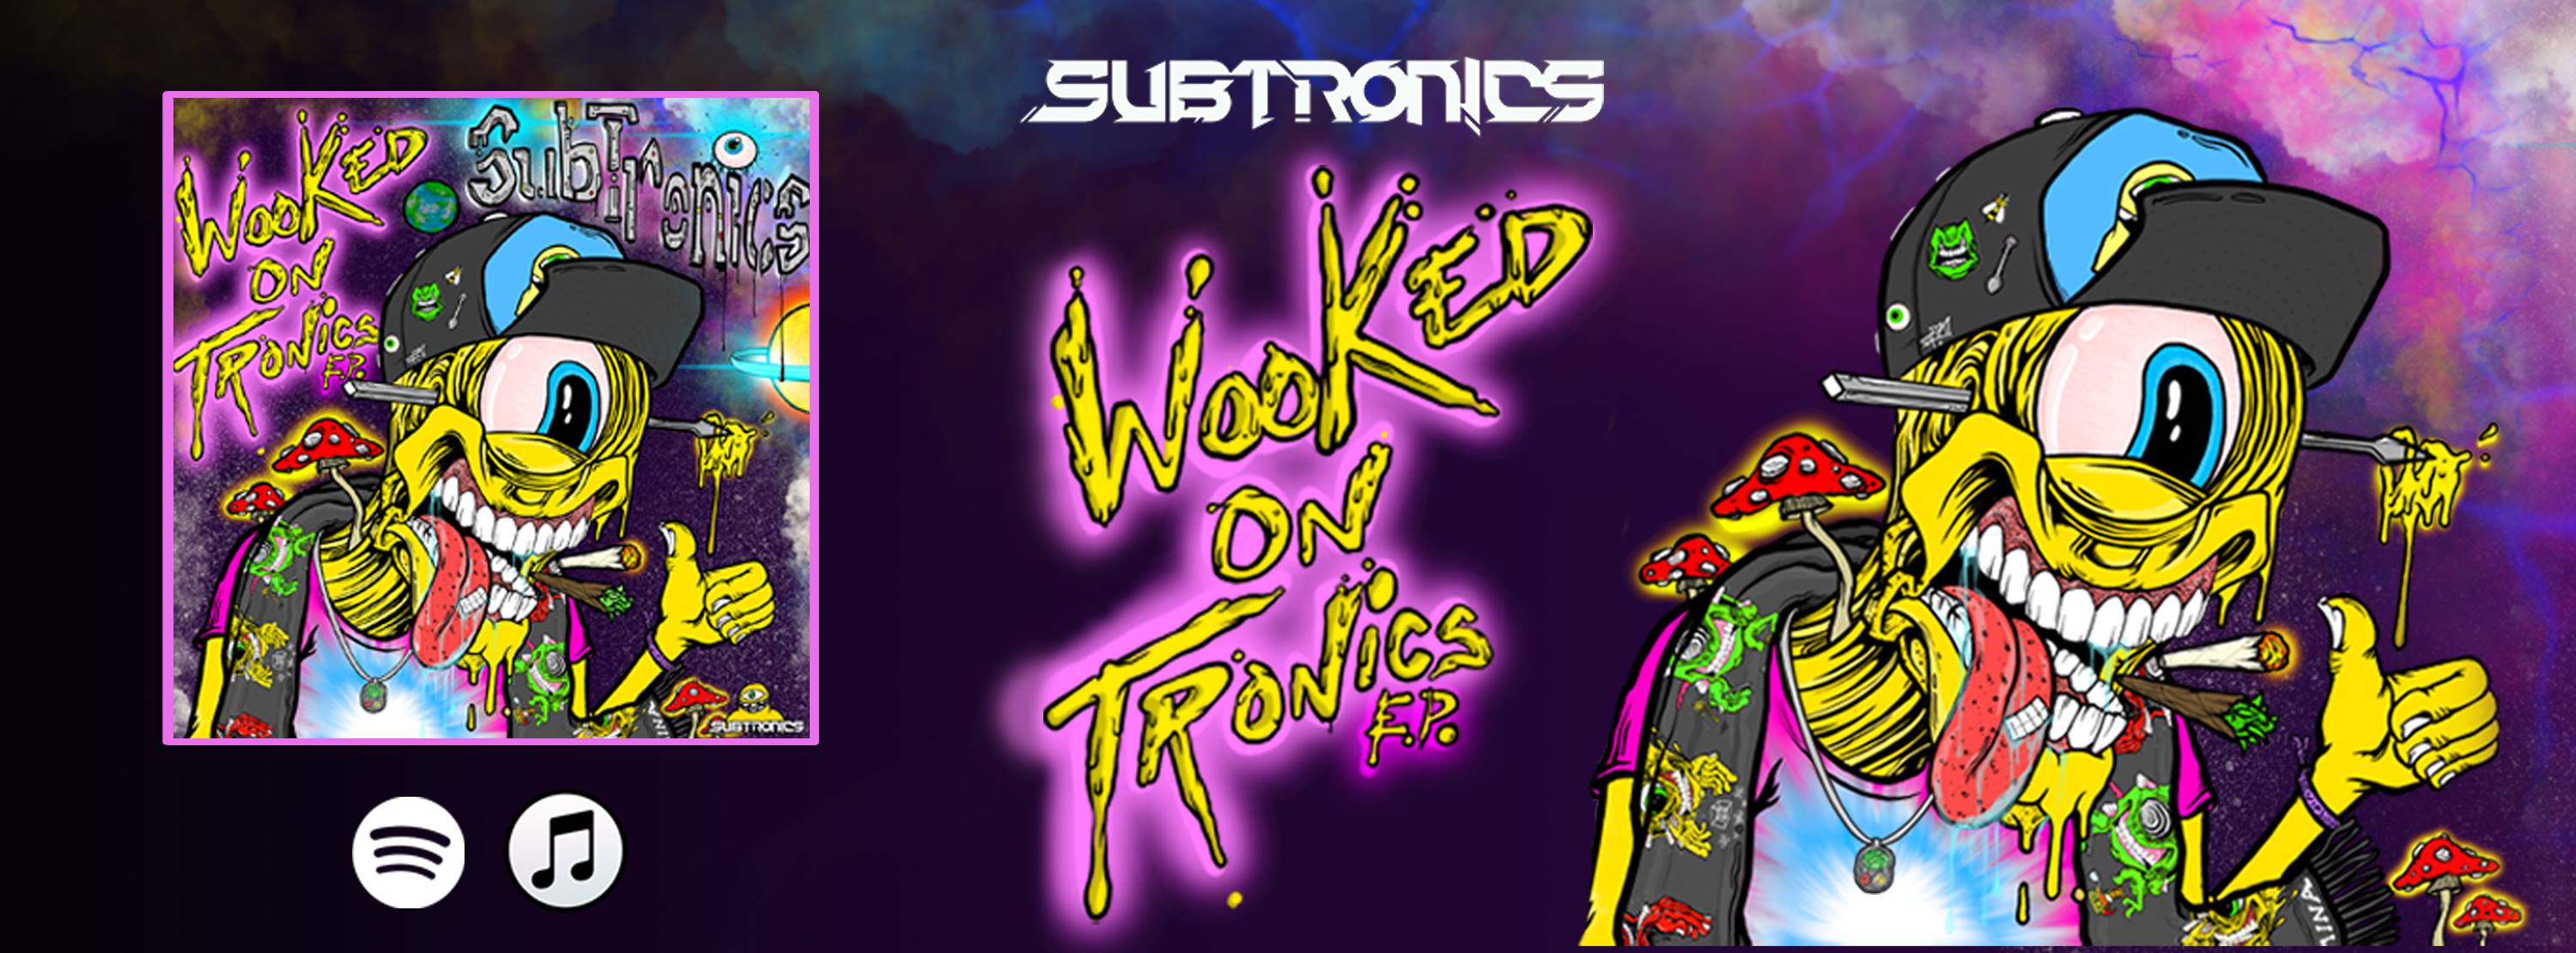 EP Review: Wooked on Tronics